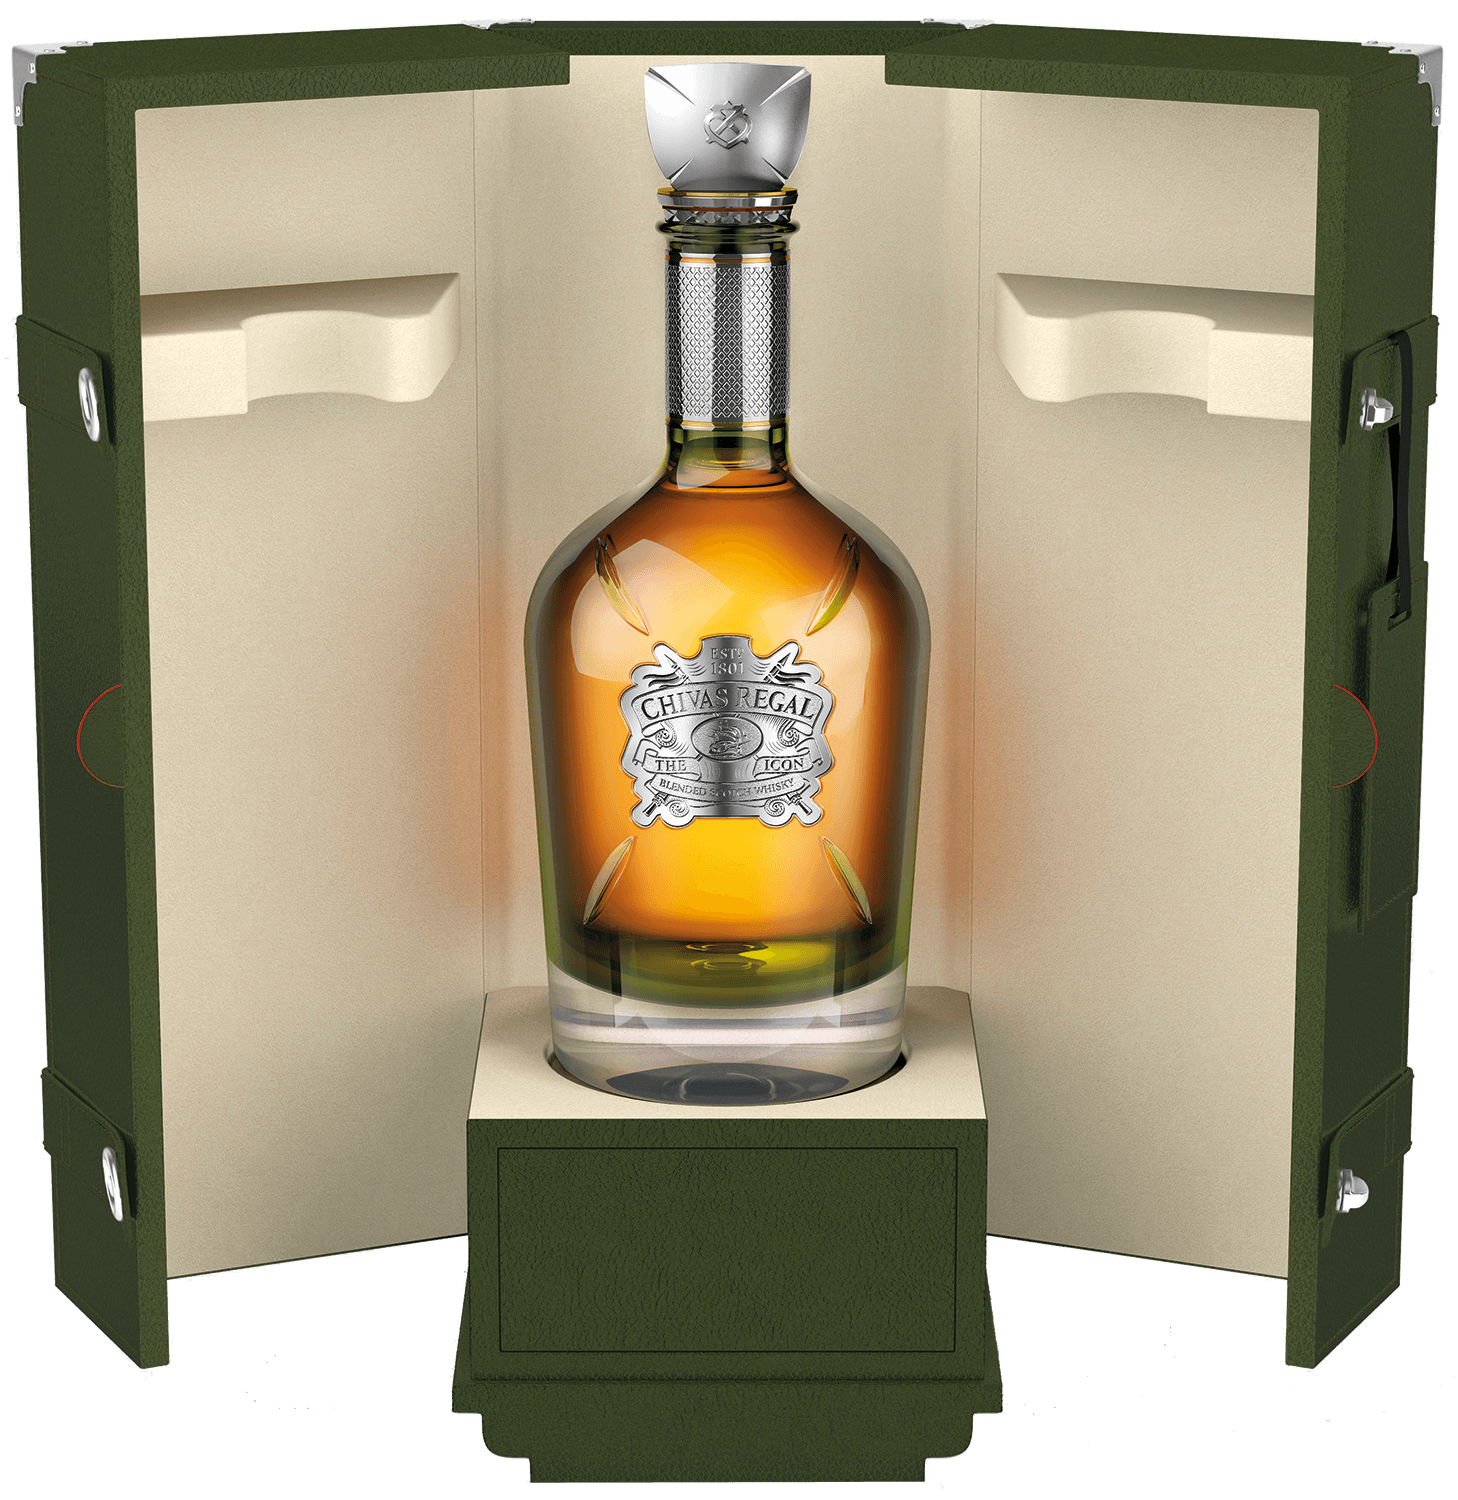 Chivas Regal Icon Blended Scotch Whisky (gift box) chivas regal blended scotch whisky 25 y o gift box